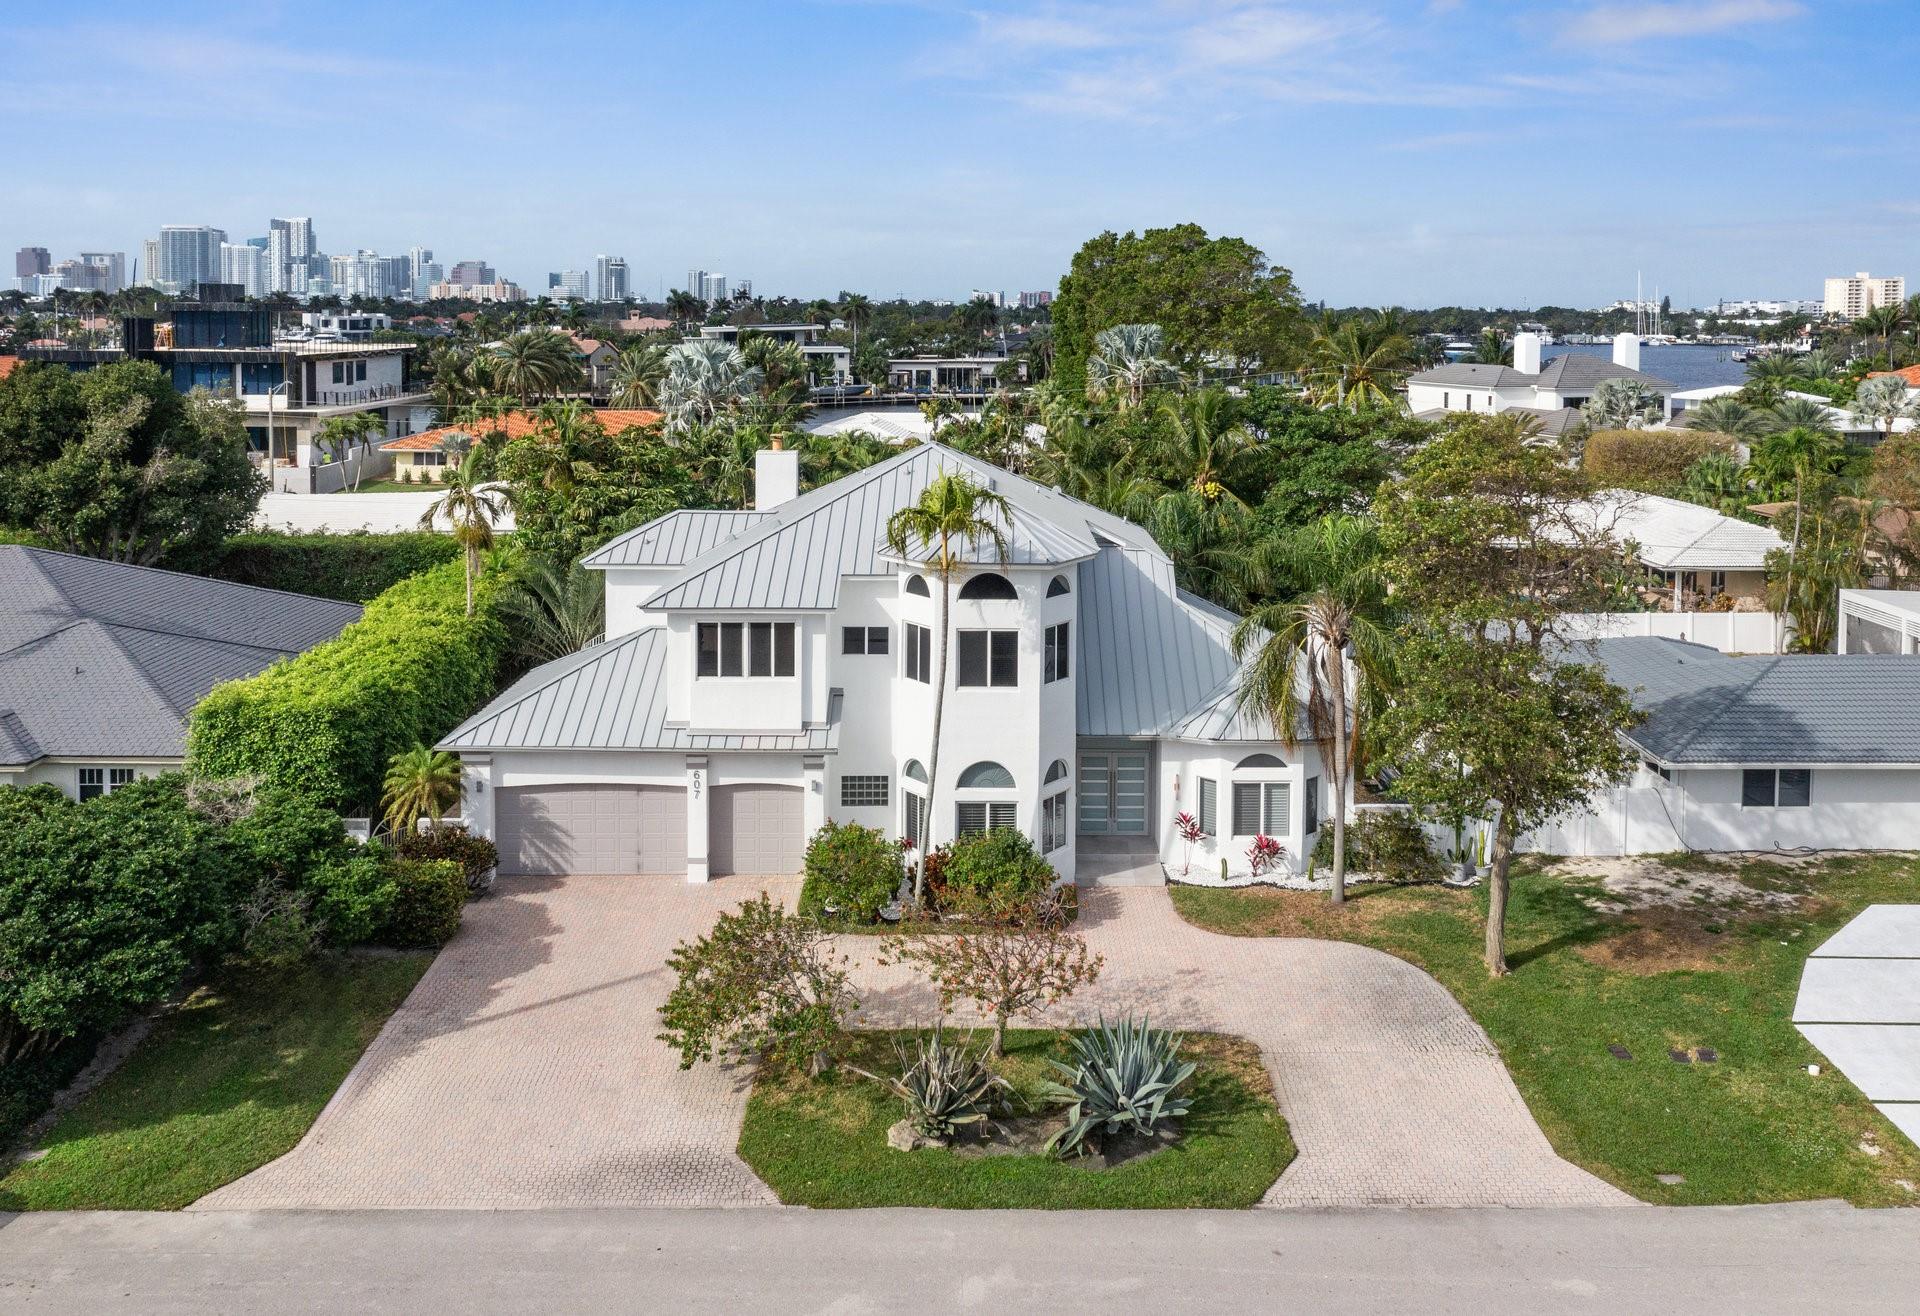 This 4 bedroom and 3 bath home is located in the wonderful community of Sunrise Intracoastal. This home has been updated. New gourmet kitchen, with open floor plan. Over sized master suite with private balcony. Updated floors New roof, Walking distance to the ocean, restaurants and shopping.